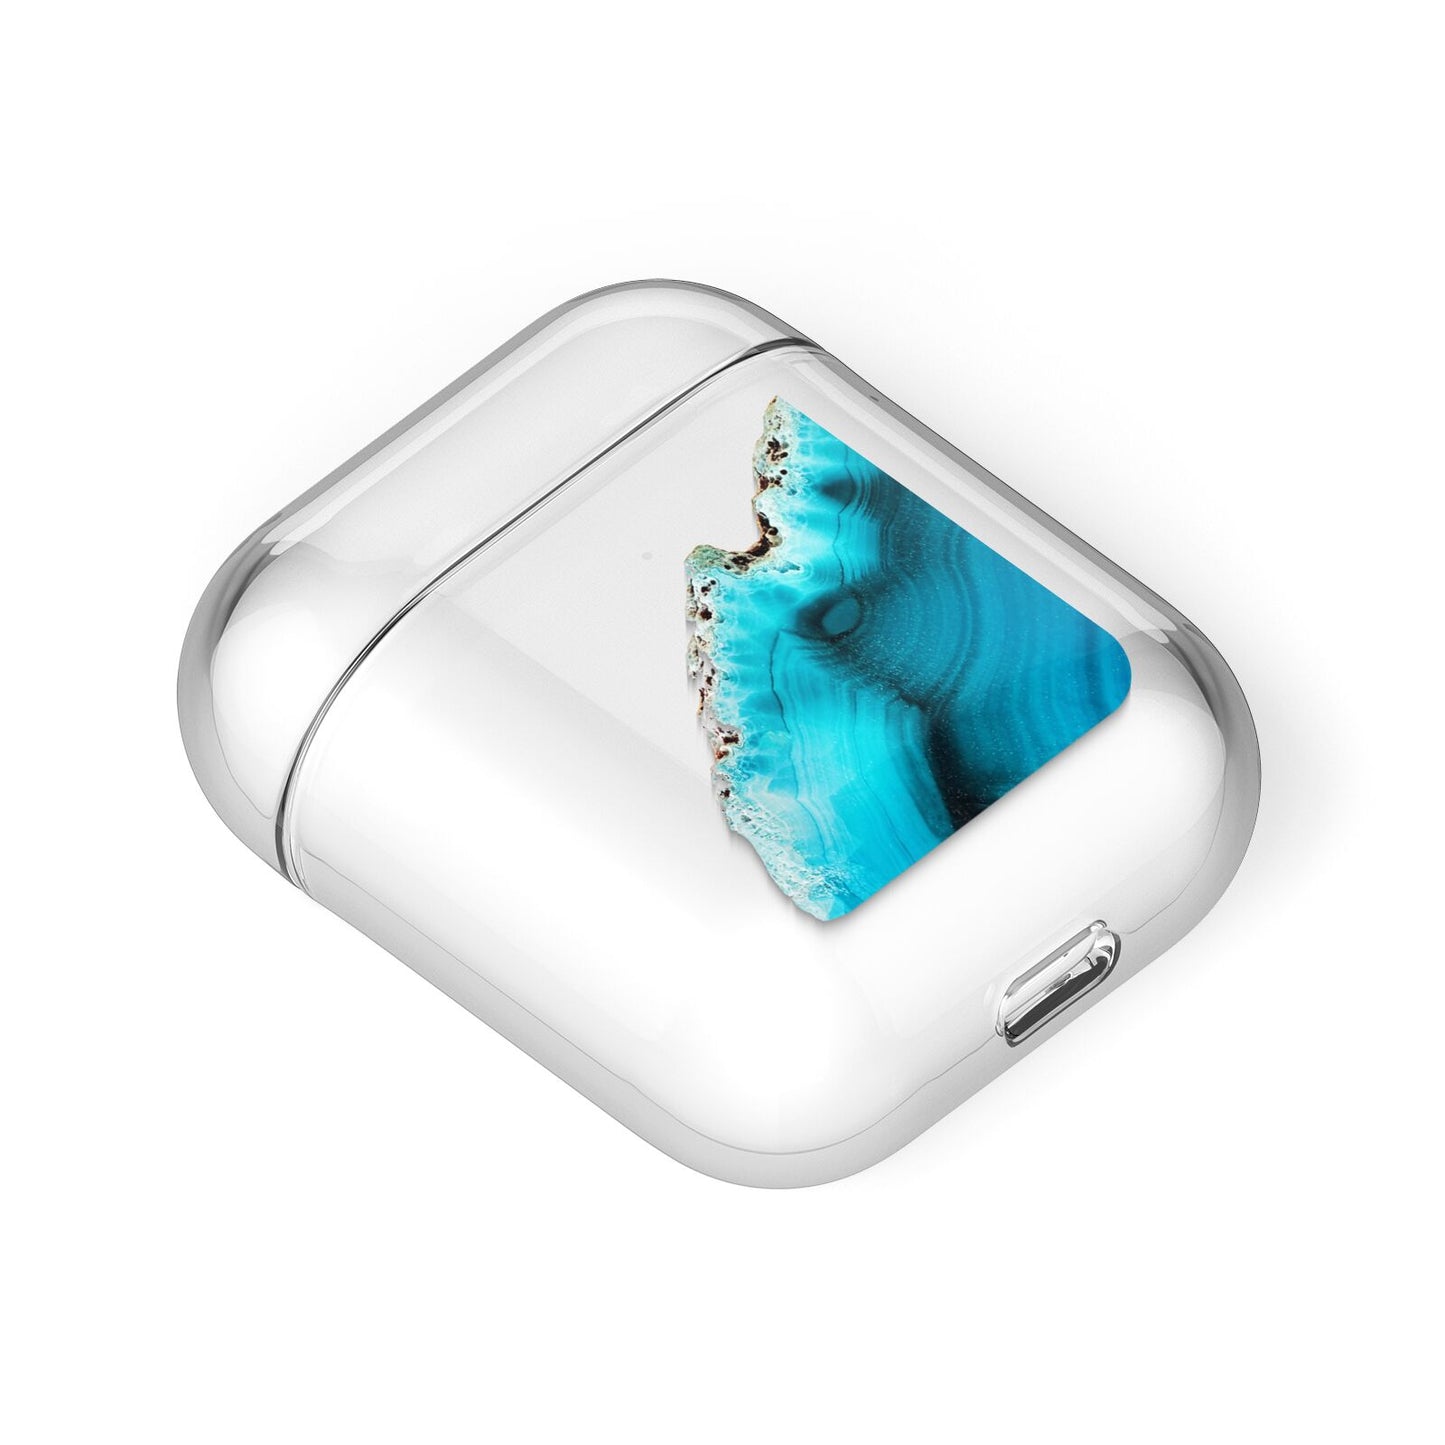 Agate Blue Turquoise AirPods Case Laid Flat